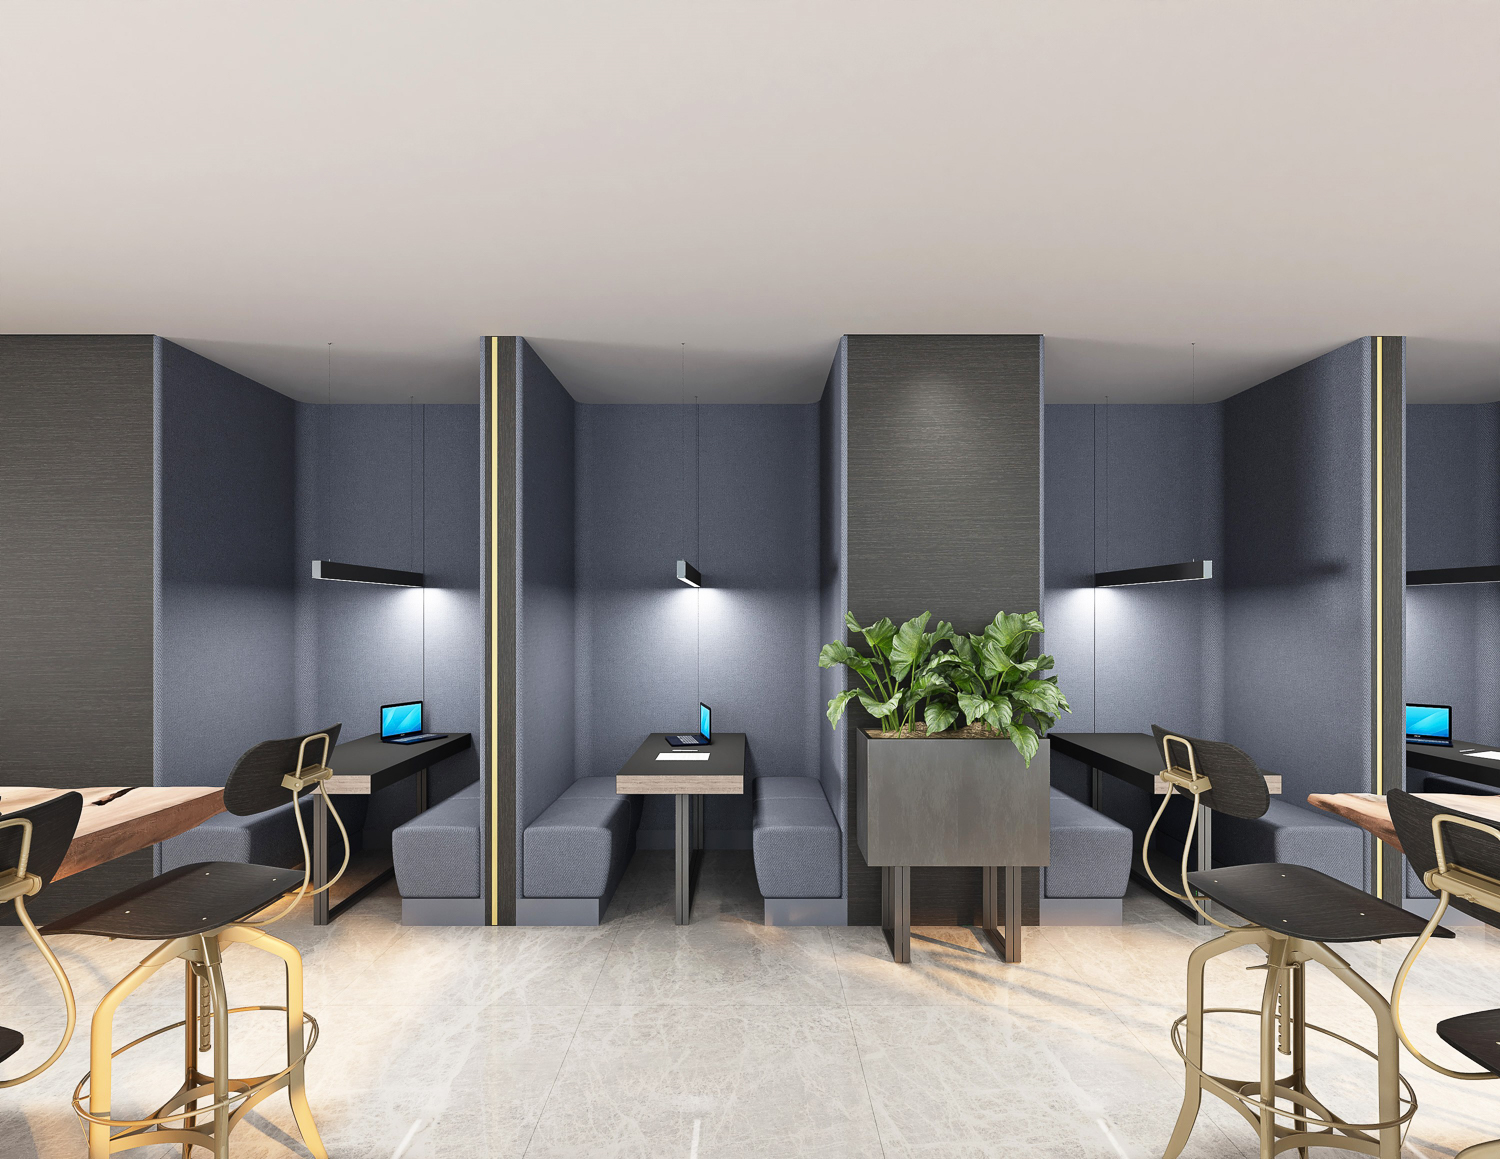 1900 Broadway 4th floor co-working lounge, image courtesy Behring Co, rendering by Elizabeth Premazzi